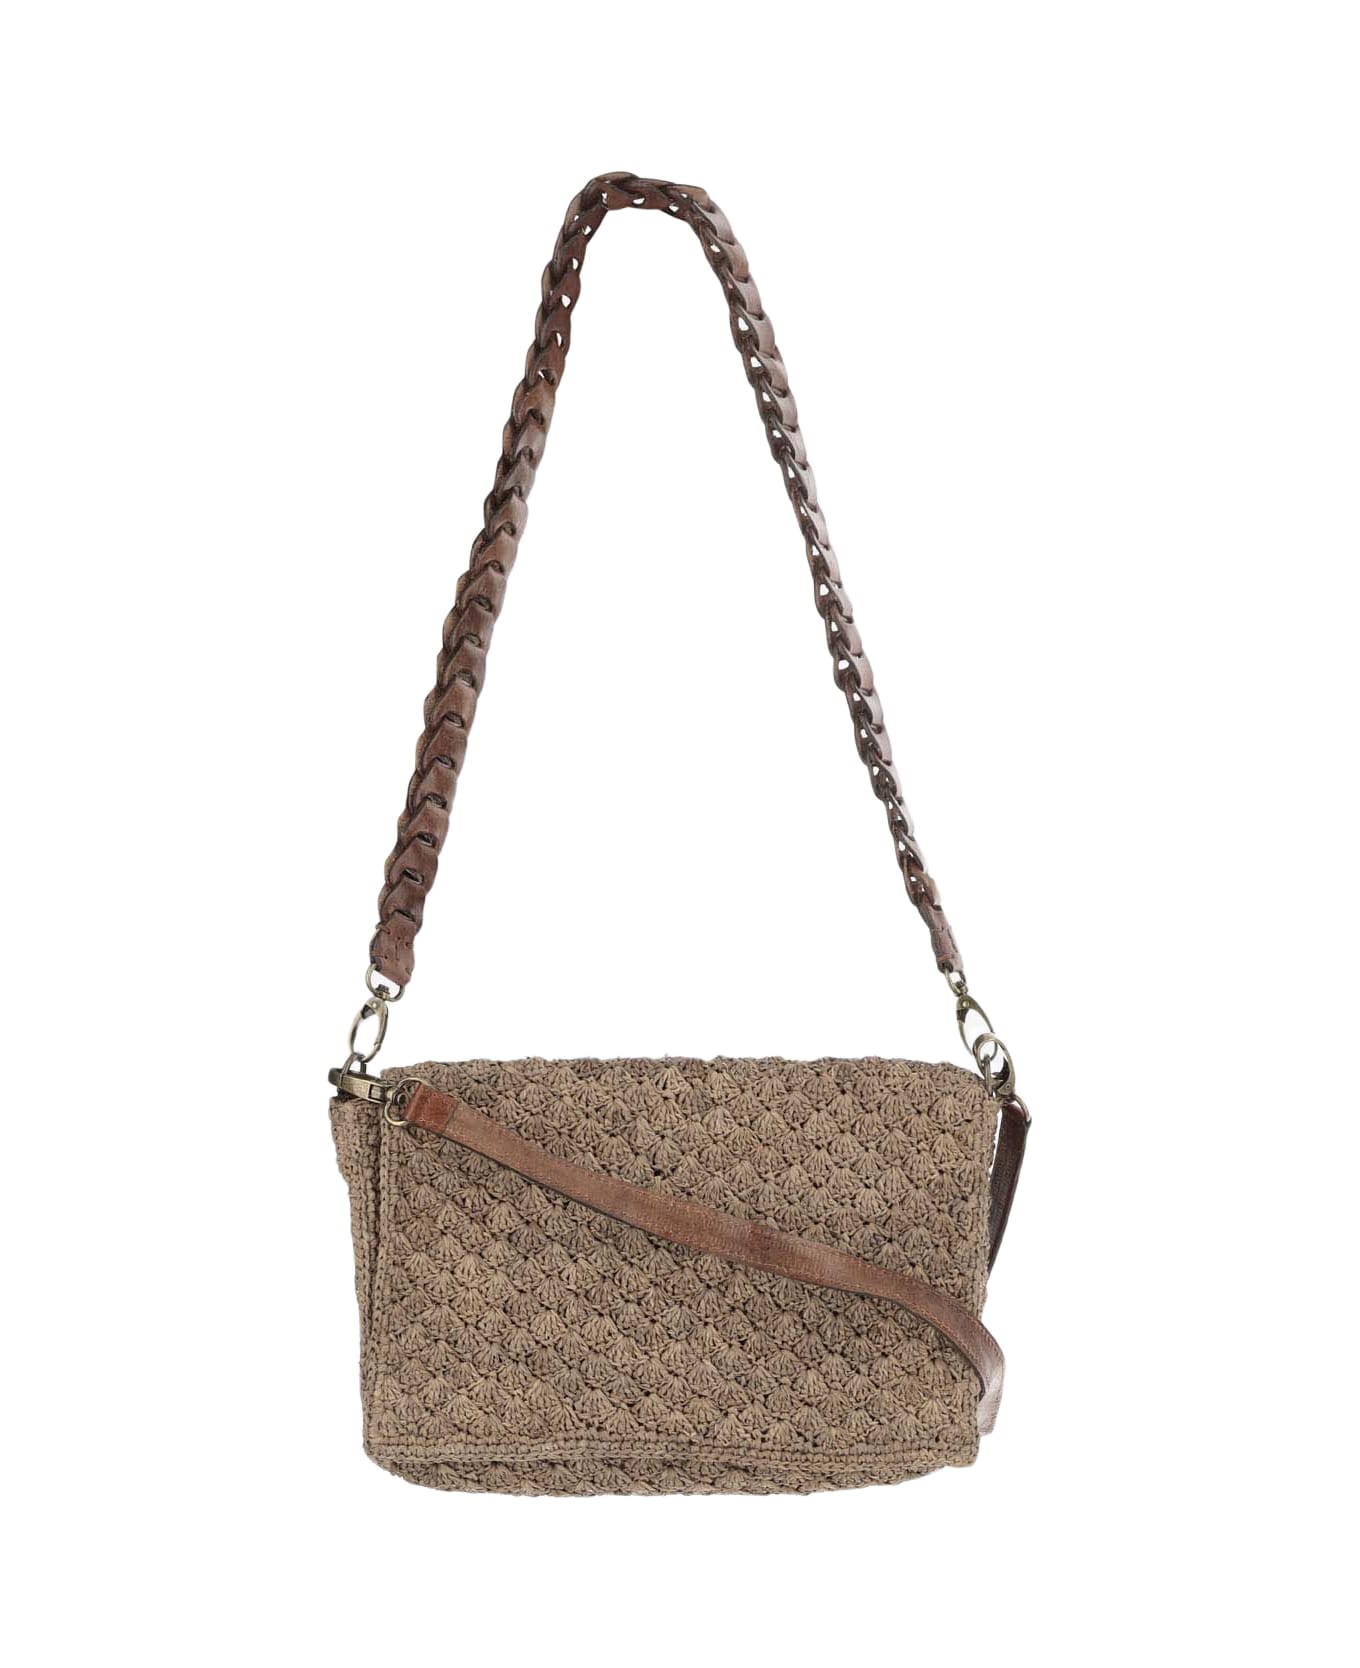 Ibeliv Sonia Bag In Raffia And Leather - Beige ショルダーバッグ